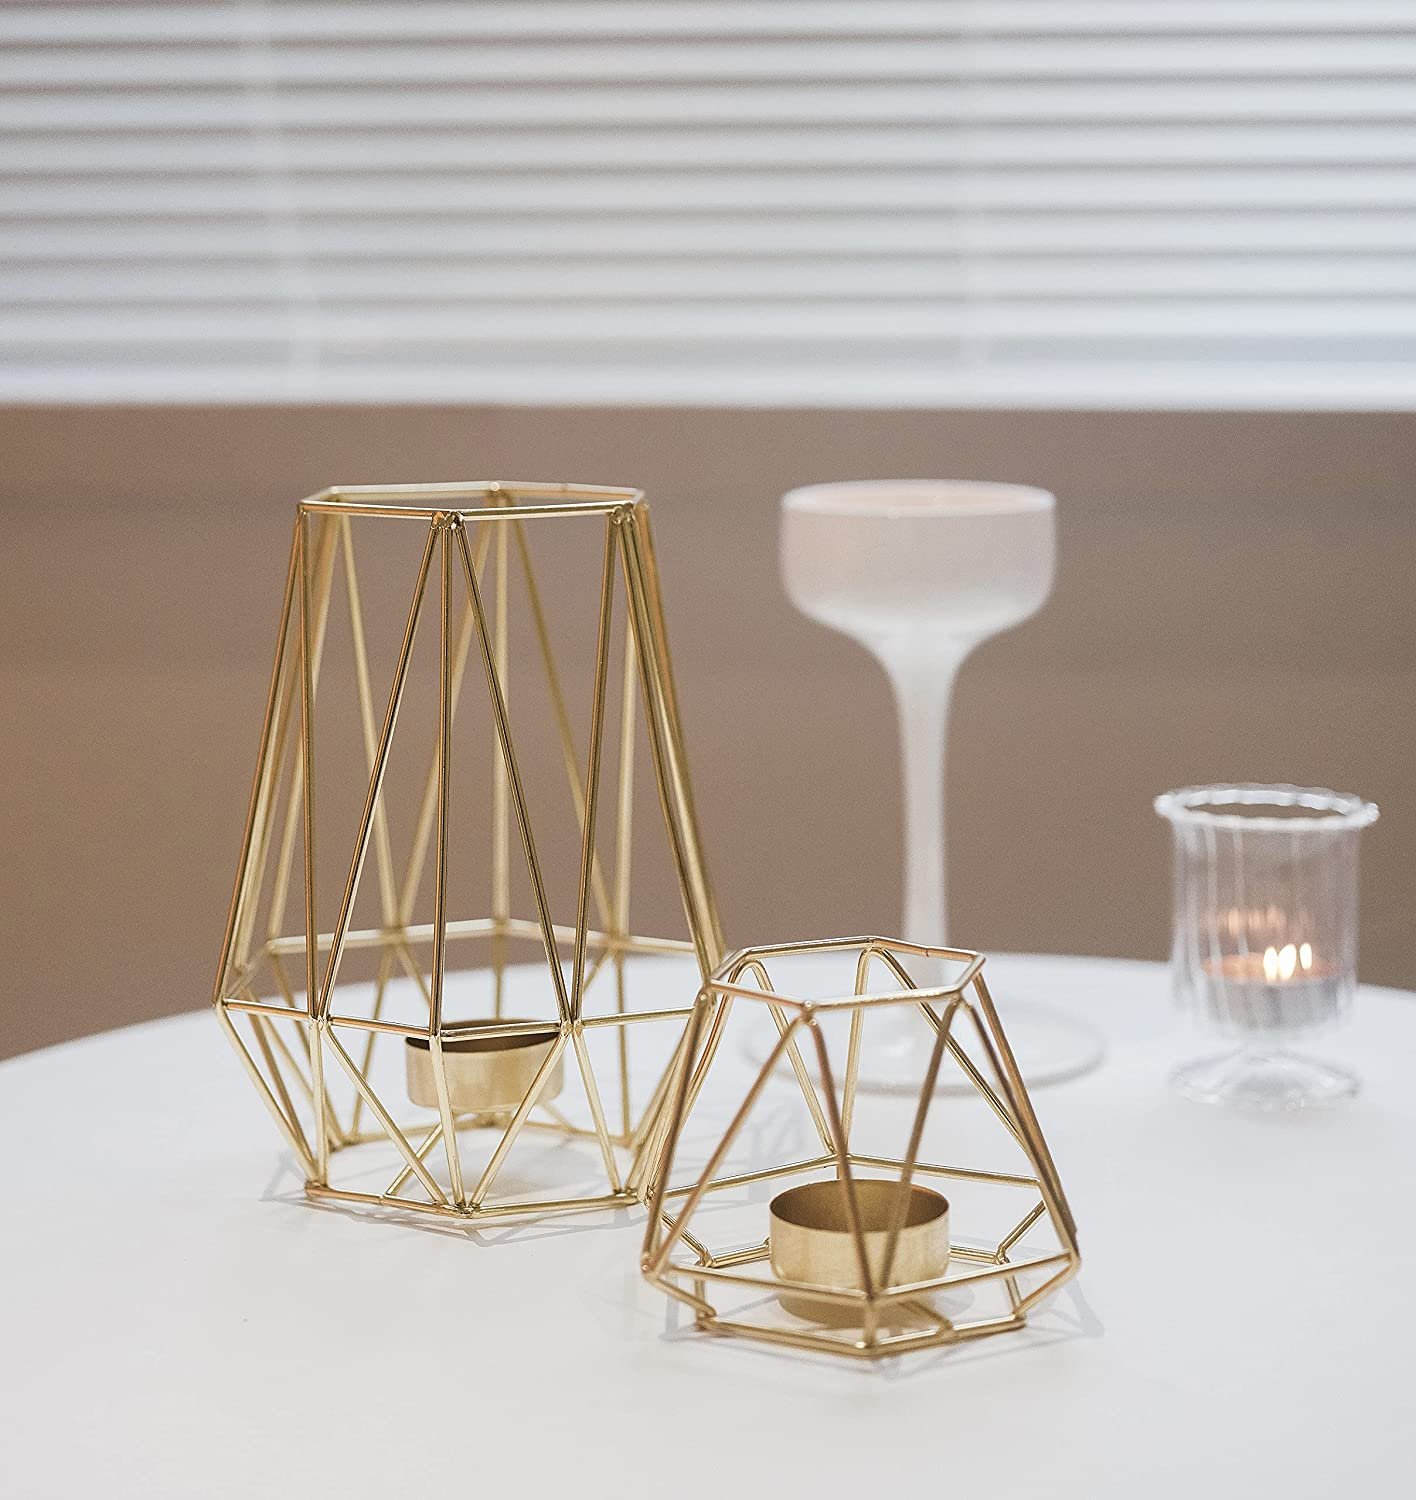 Set of 2 Gold Geometric Metal Tealight Candle Holders